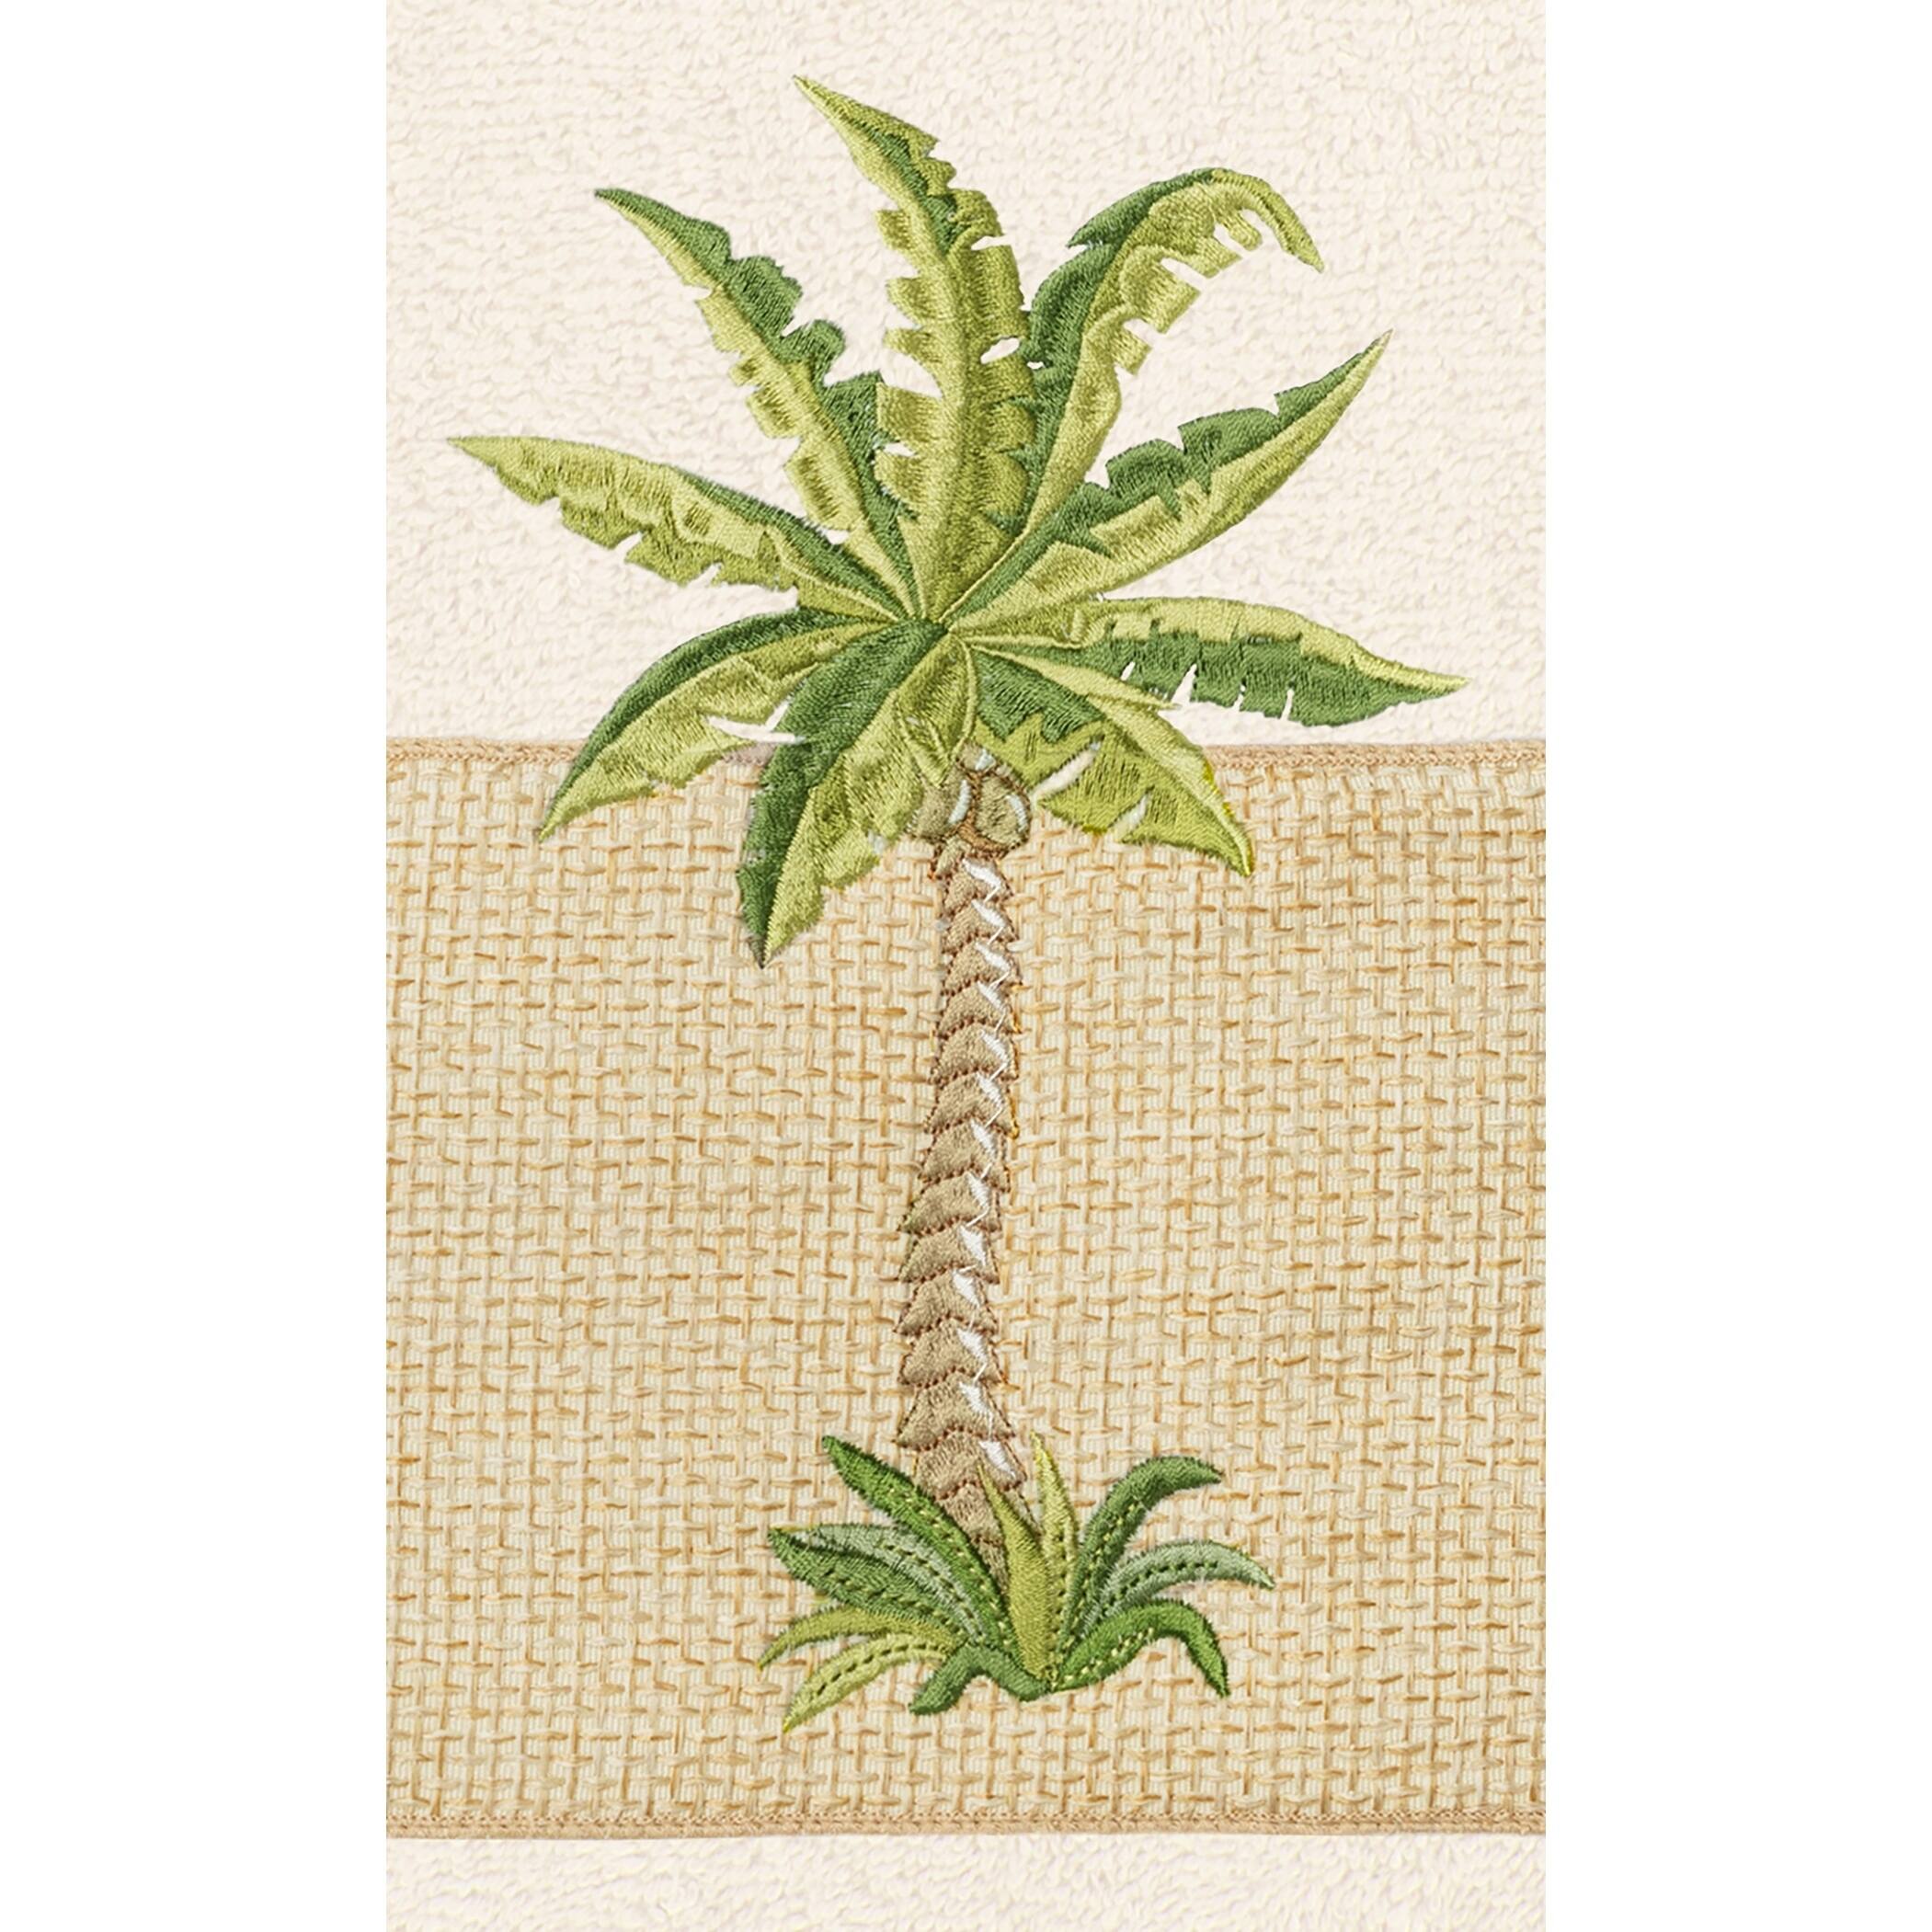 Authentic Hotel and Spa Turkish Cotton Palm Tree Embroidered Cream 3-piece Towel Set